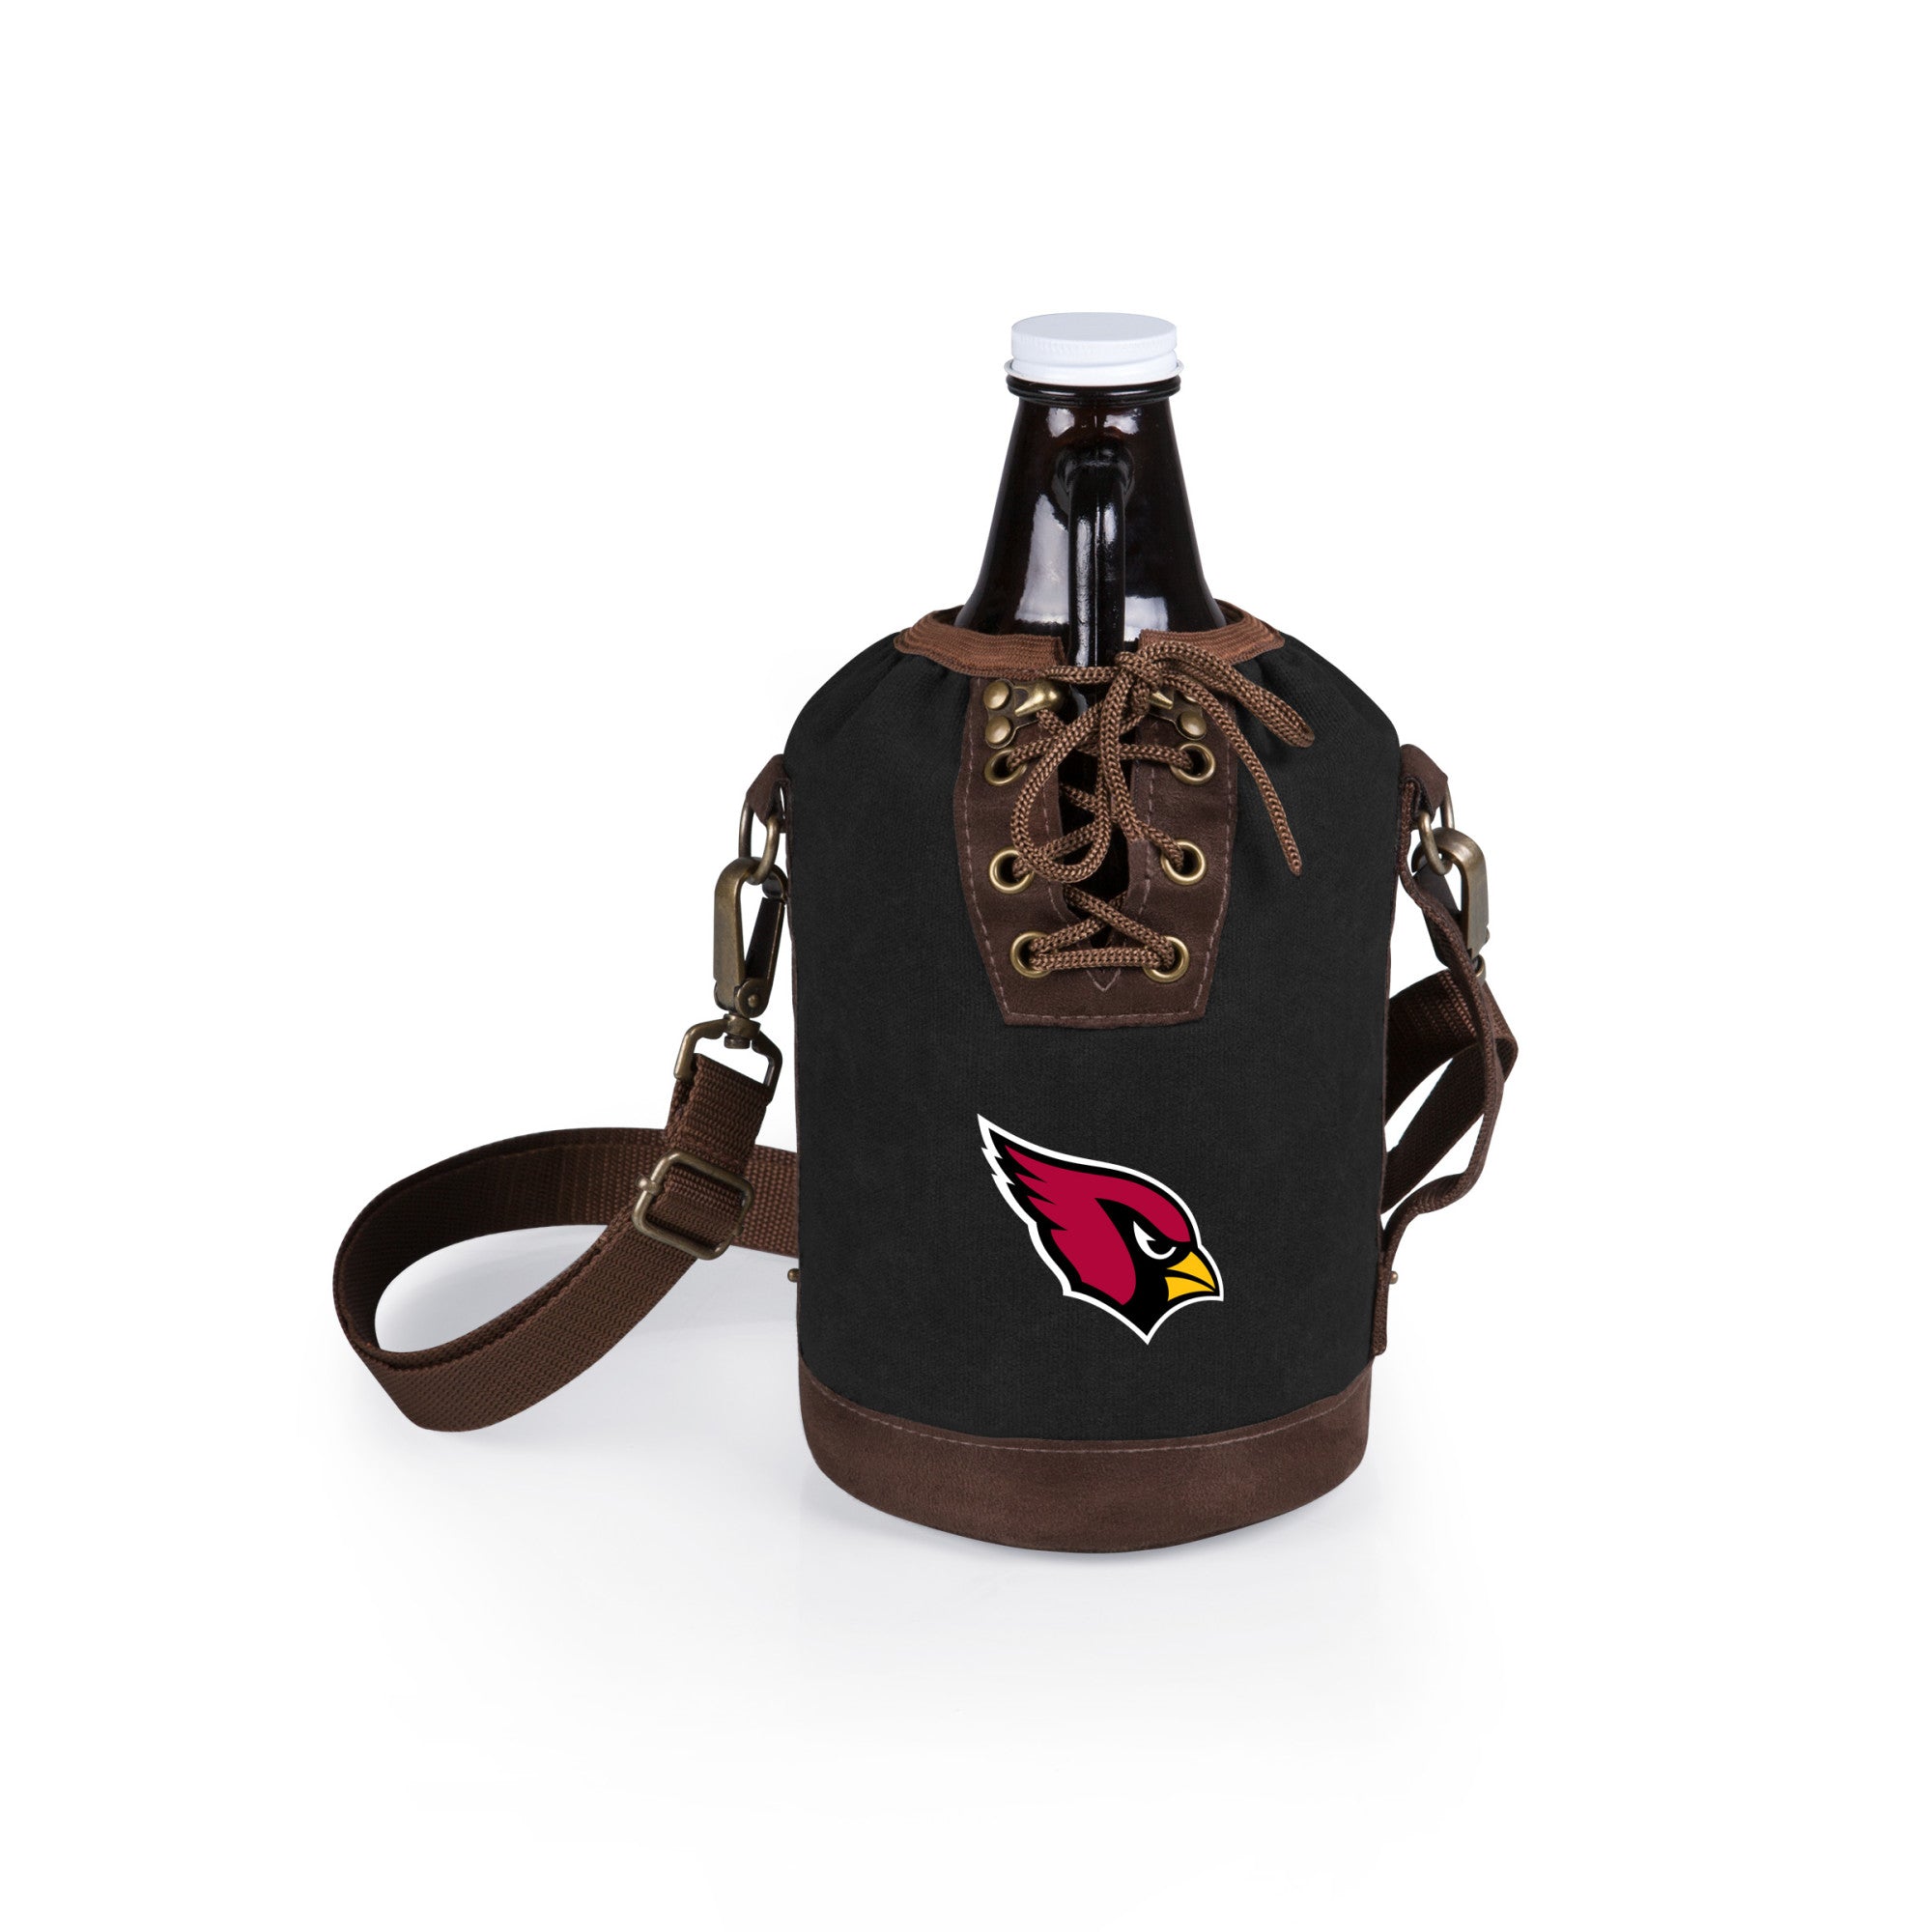 Arizona Cardinals - Insulated Growler Tote with 64 oz. Glass Growler, (Black with Brown Accents & Glass Growler)